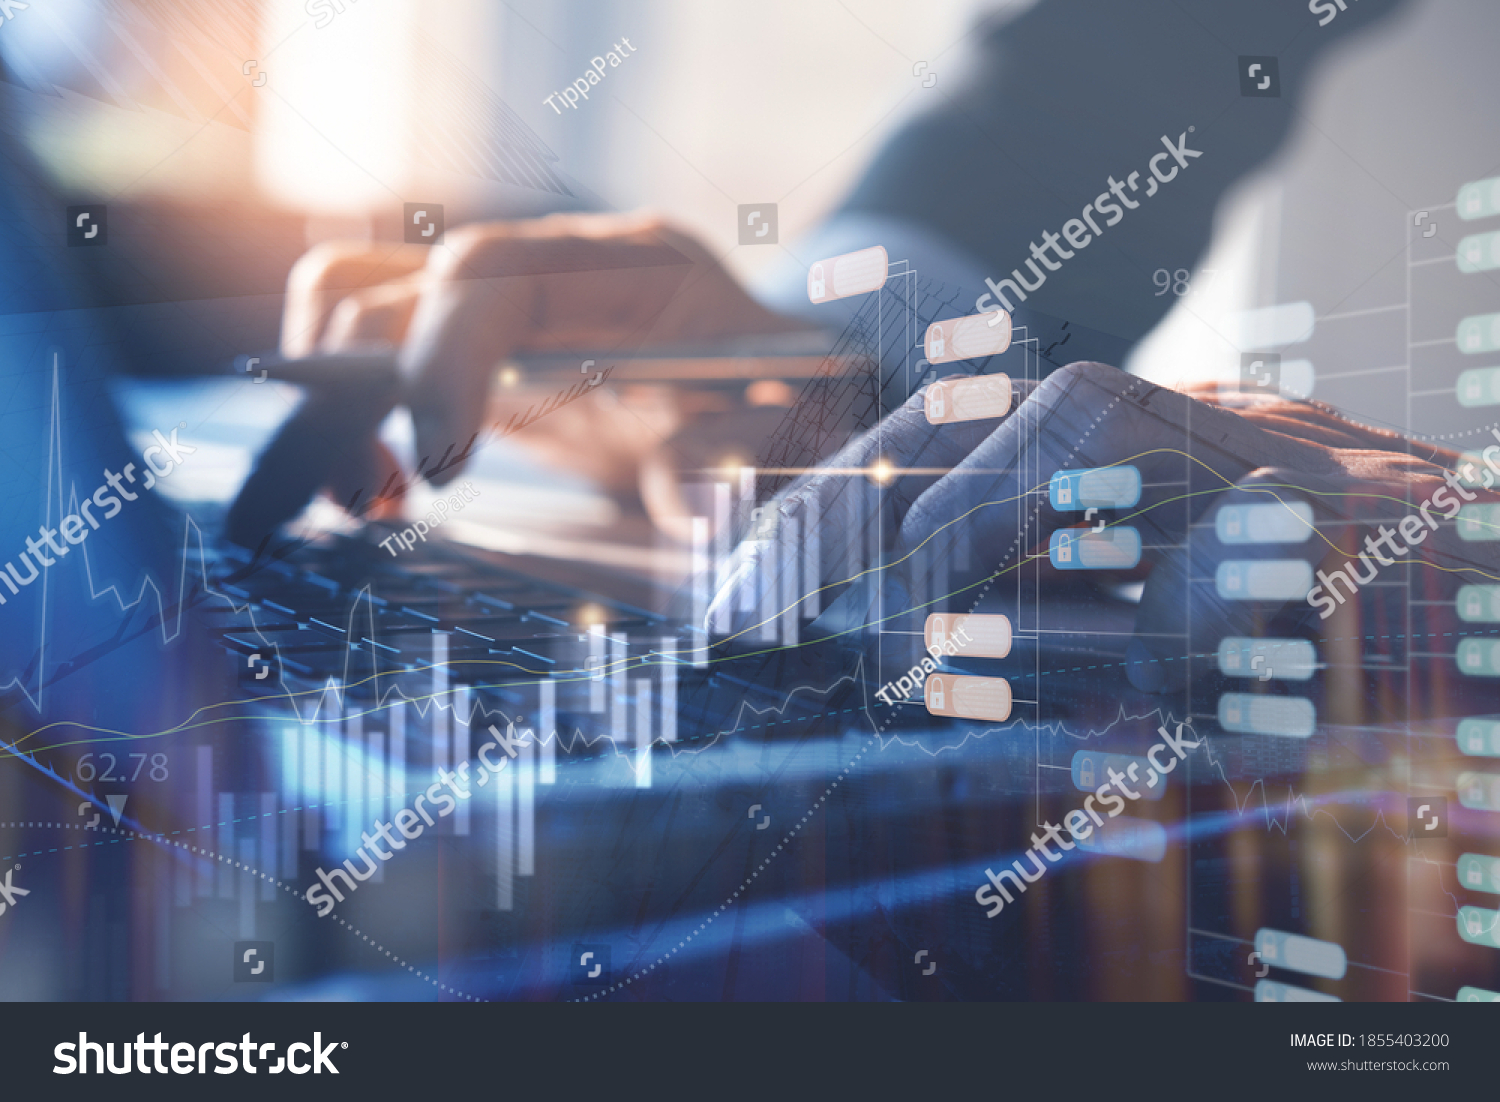 Business intelligence, blockchain technology, big data concept. Business man working on laptop computer with financial graph, monitoring on stock market report and encrypted blocks on virtual screen #1855403200